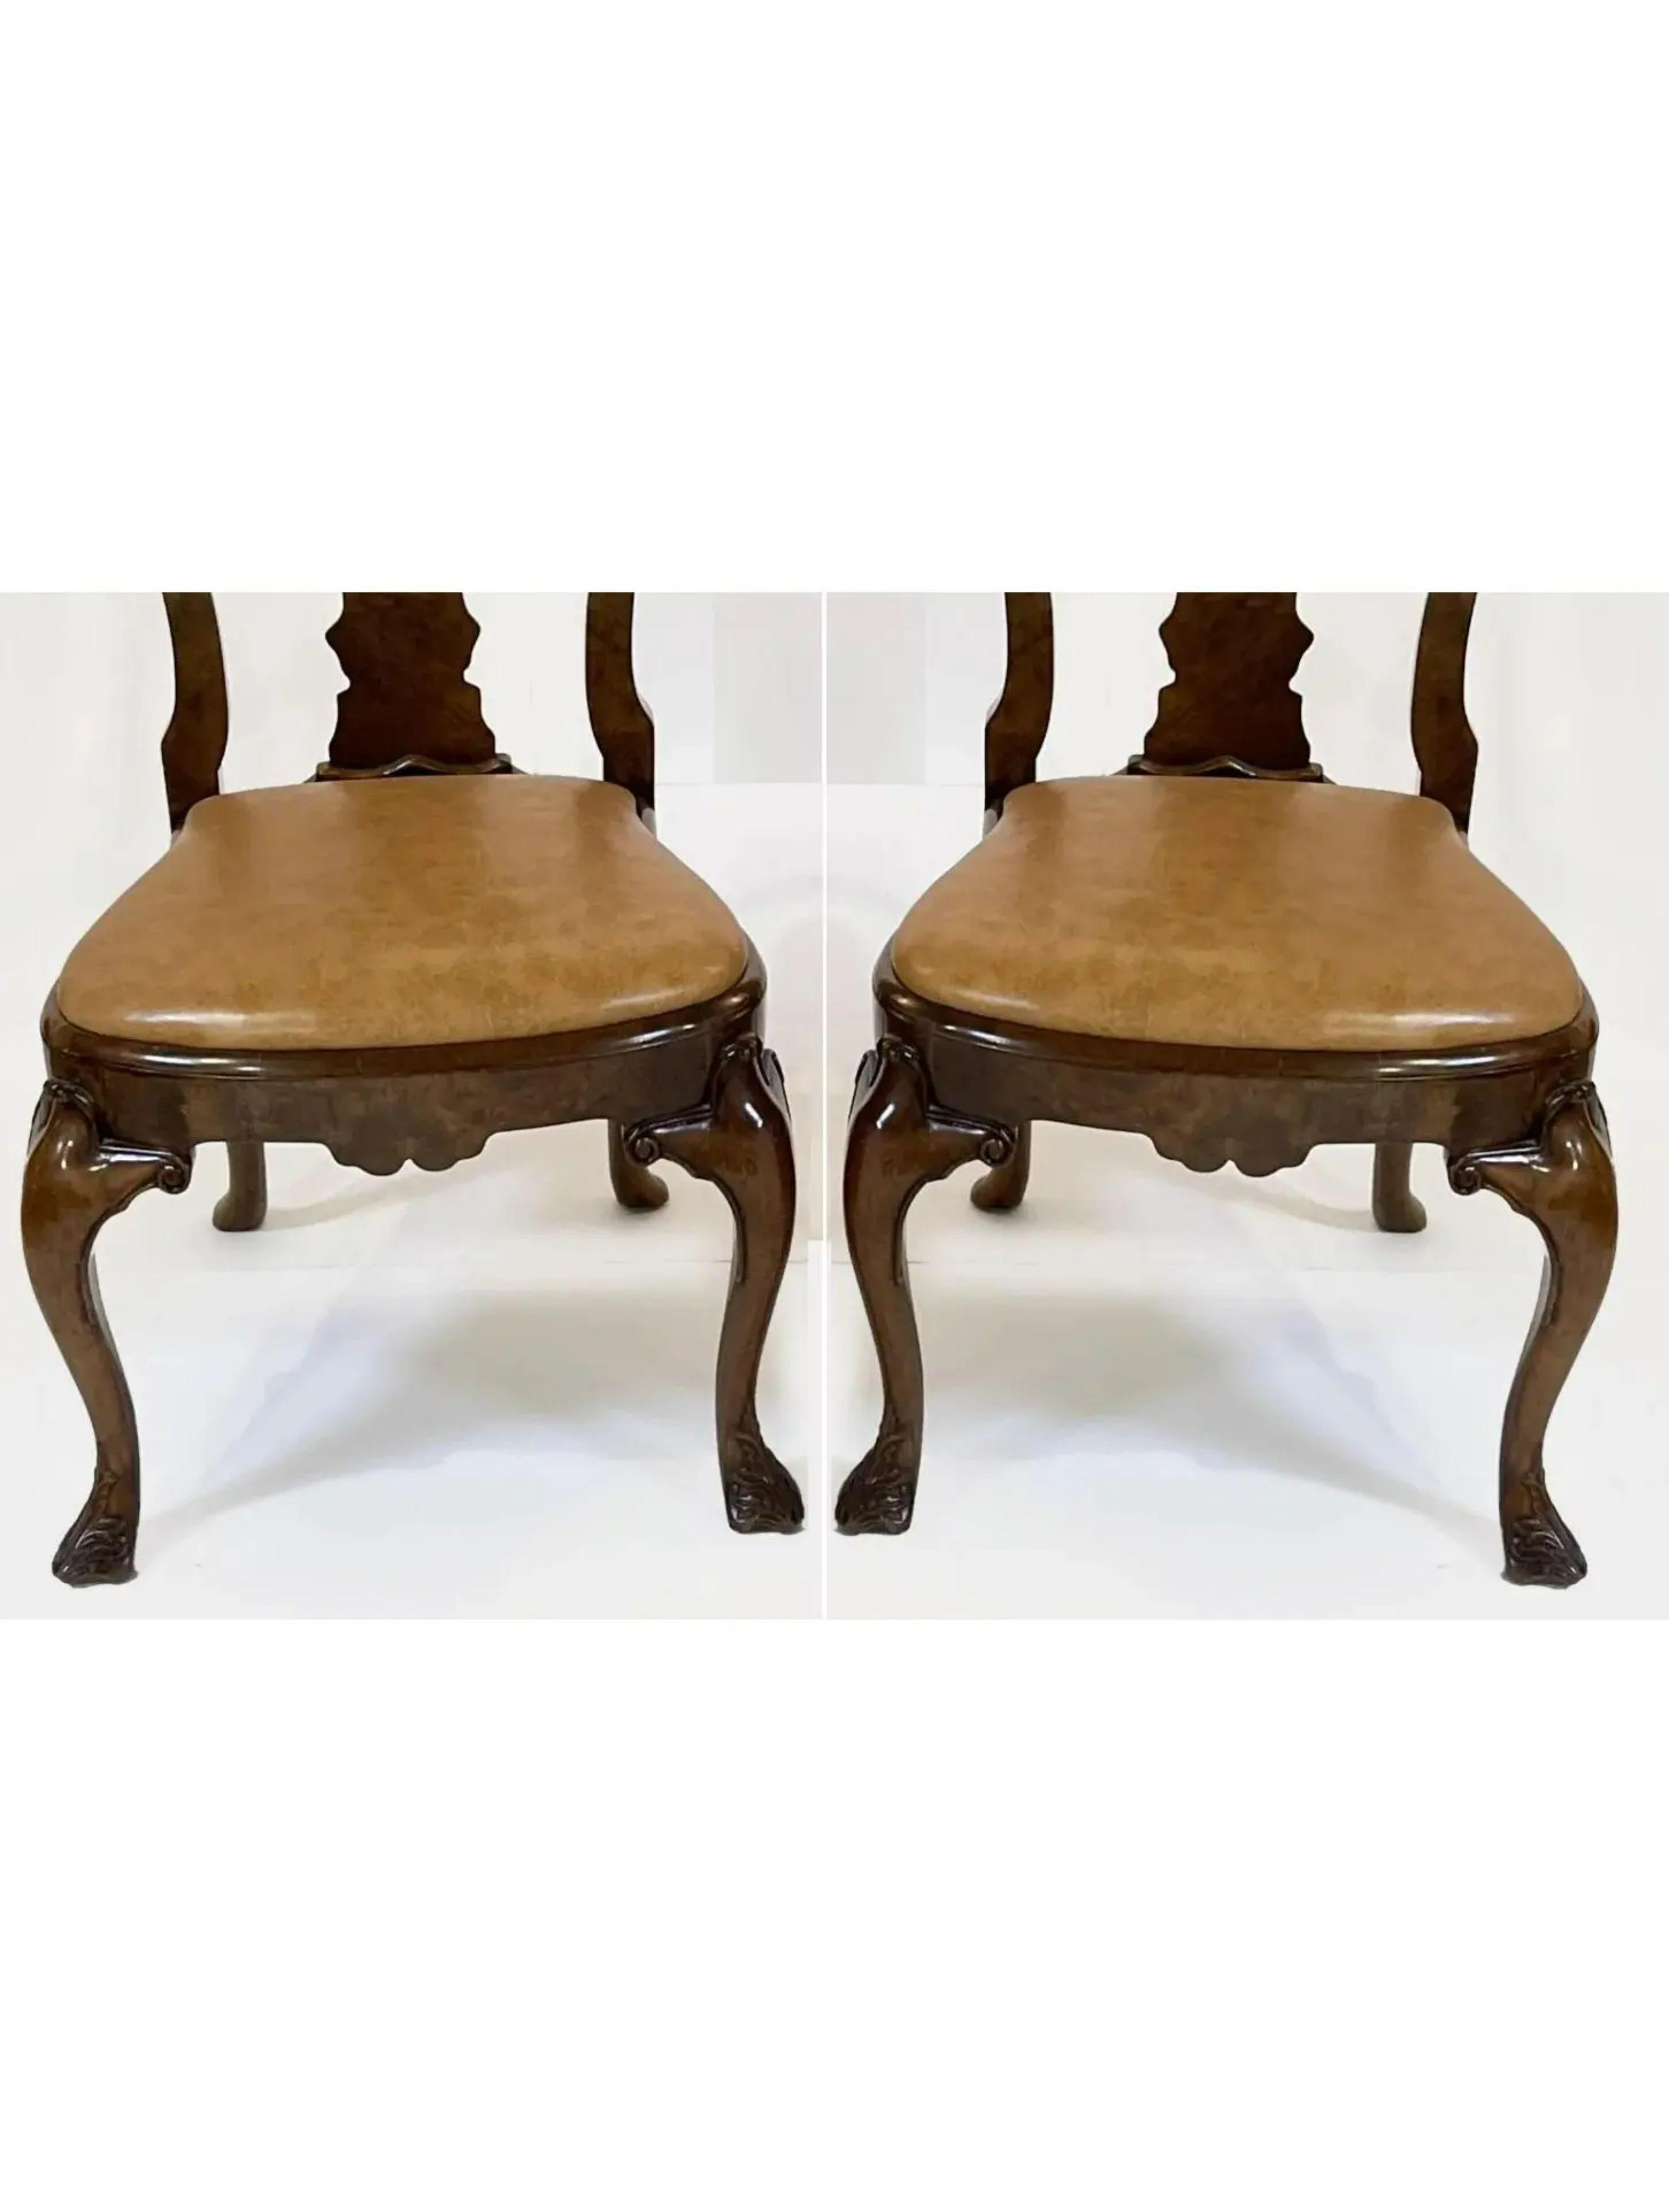 George III Style Burton ching burl walnut dining chairs. Each features a genuine leather seat and exquisitely carved details.

Additional information: 
Materials: Leather, Walnut
Color: Brown
Period: 1990s
Styles: Georgian
Number of Seats: